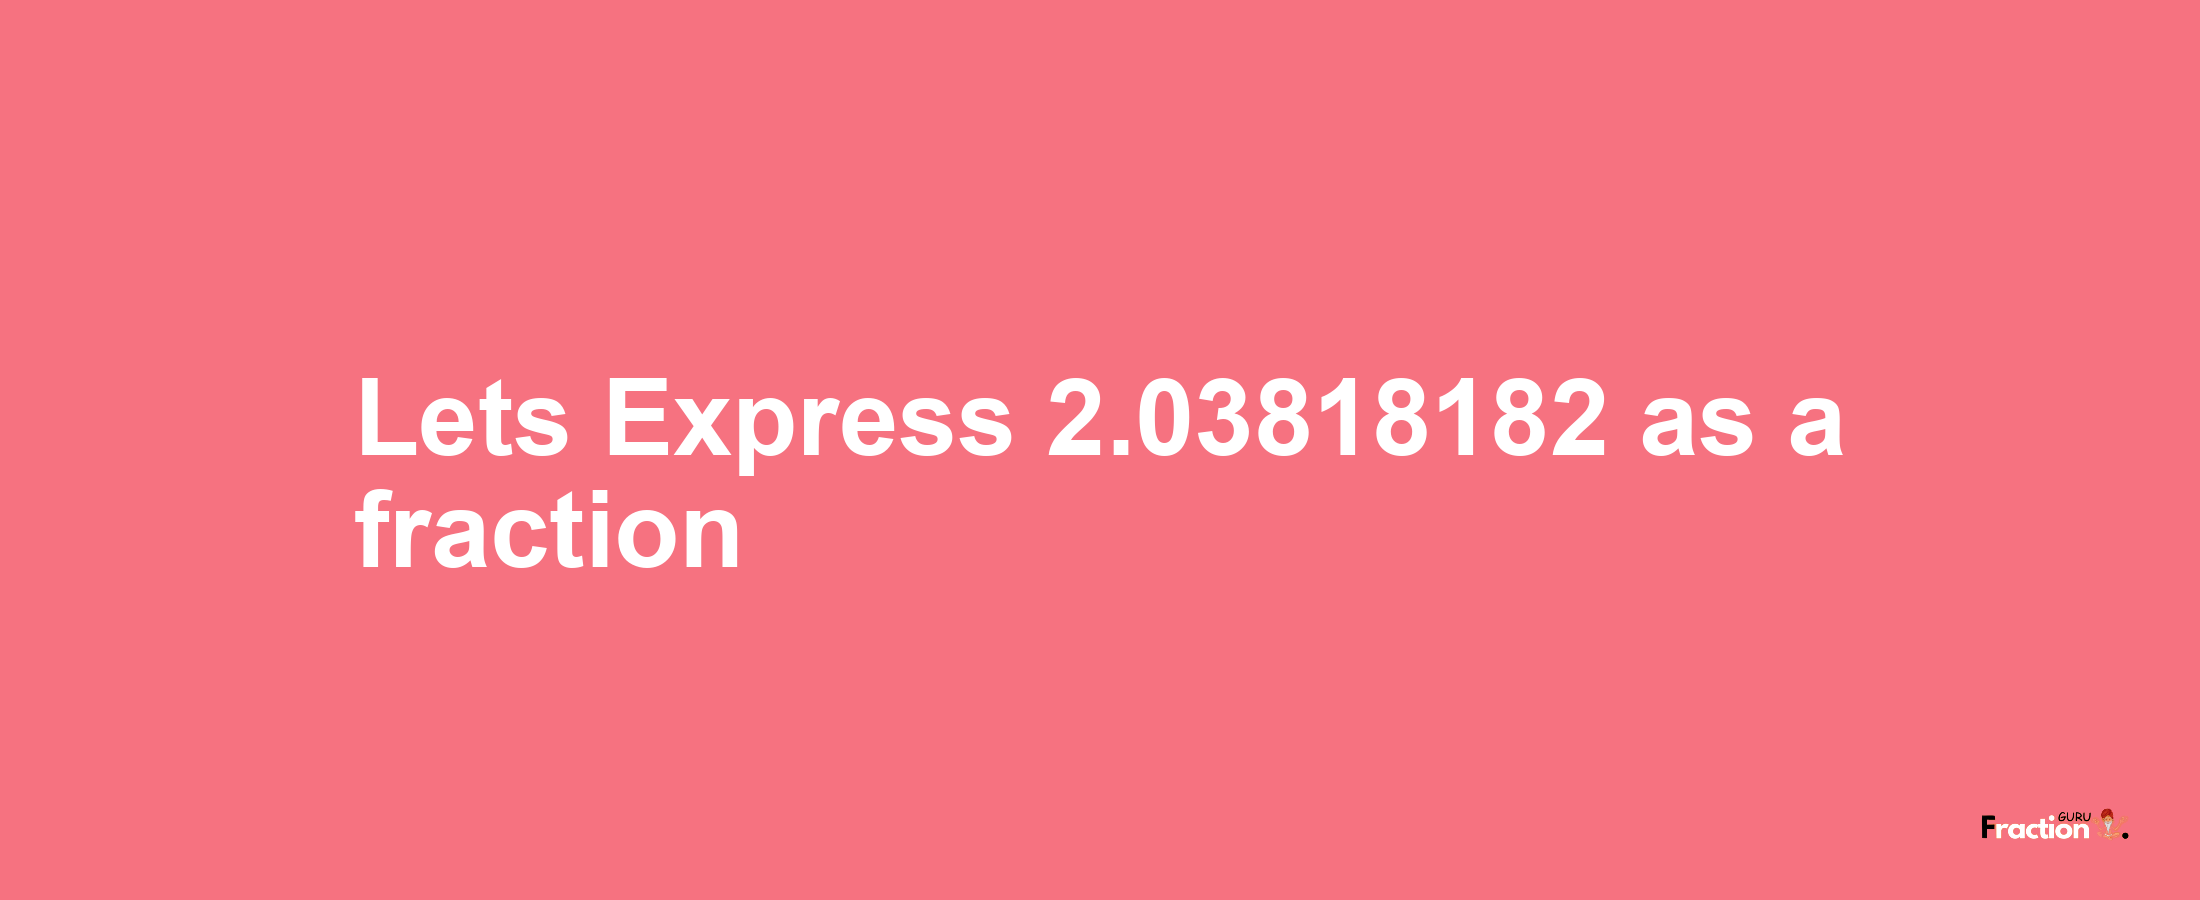 Lets Express 2.03818182 as afraction